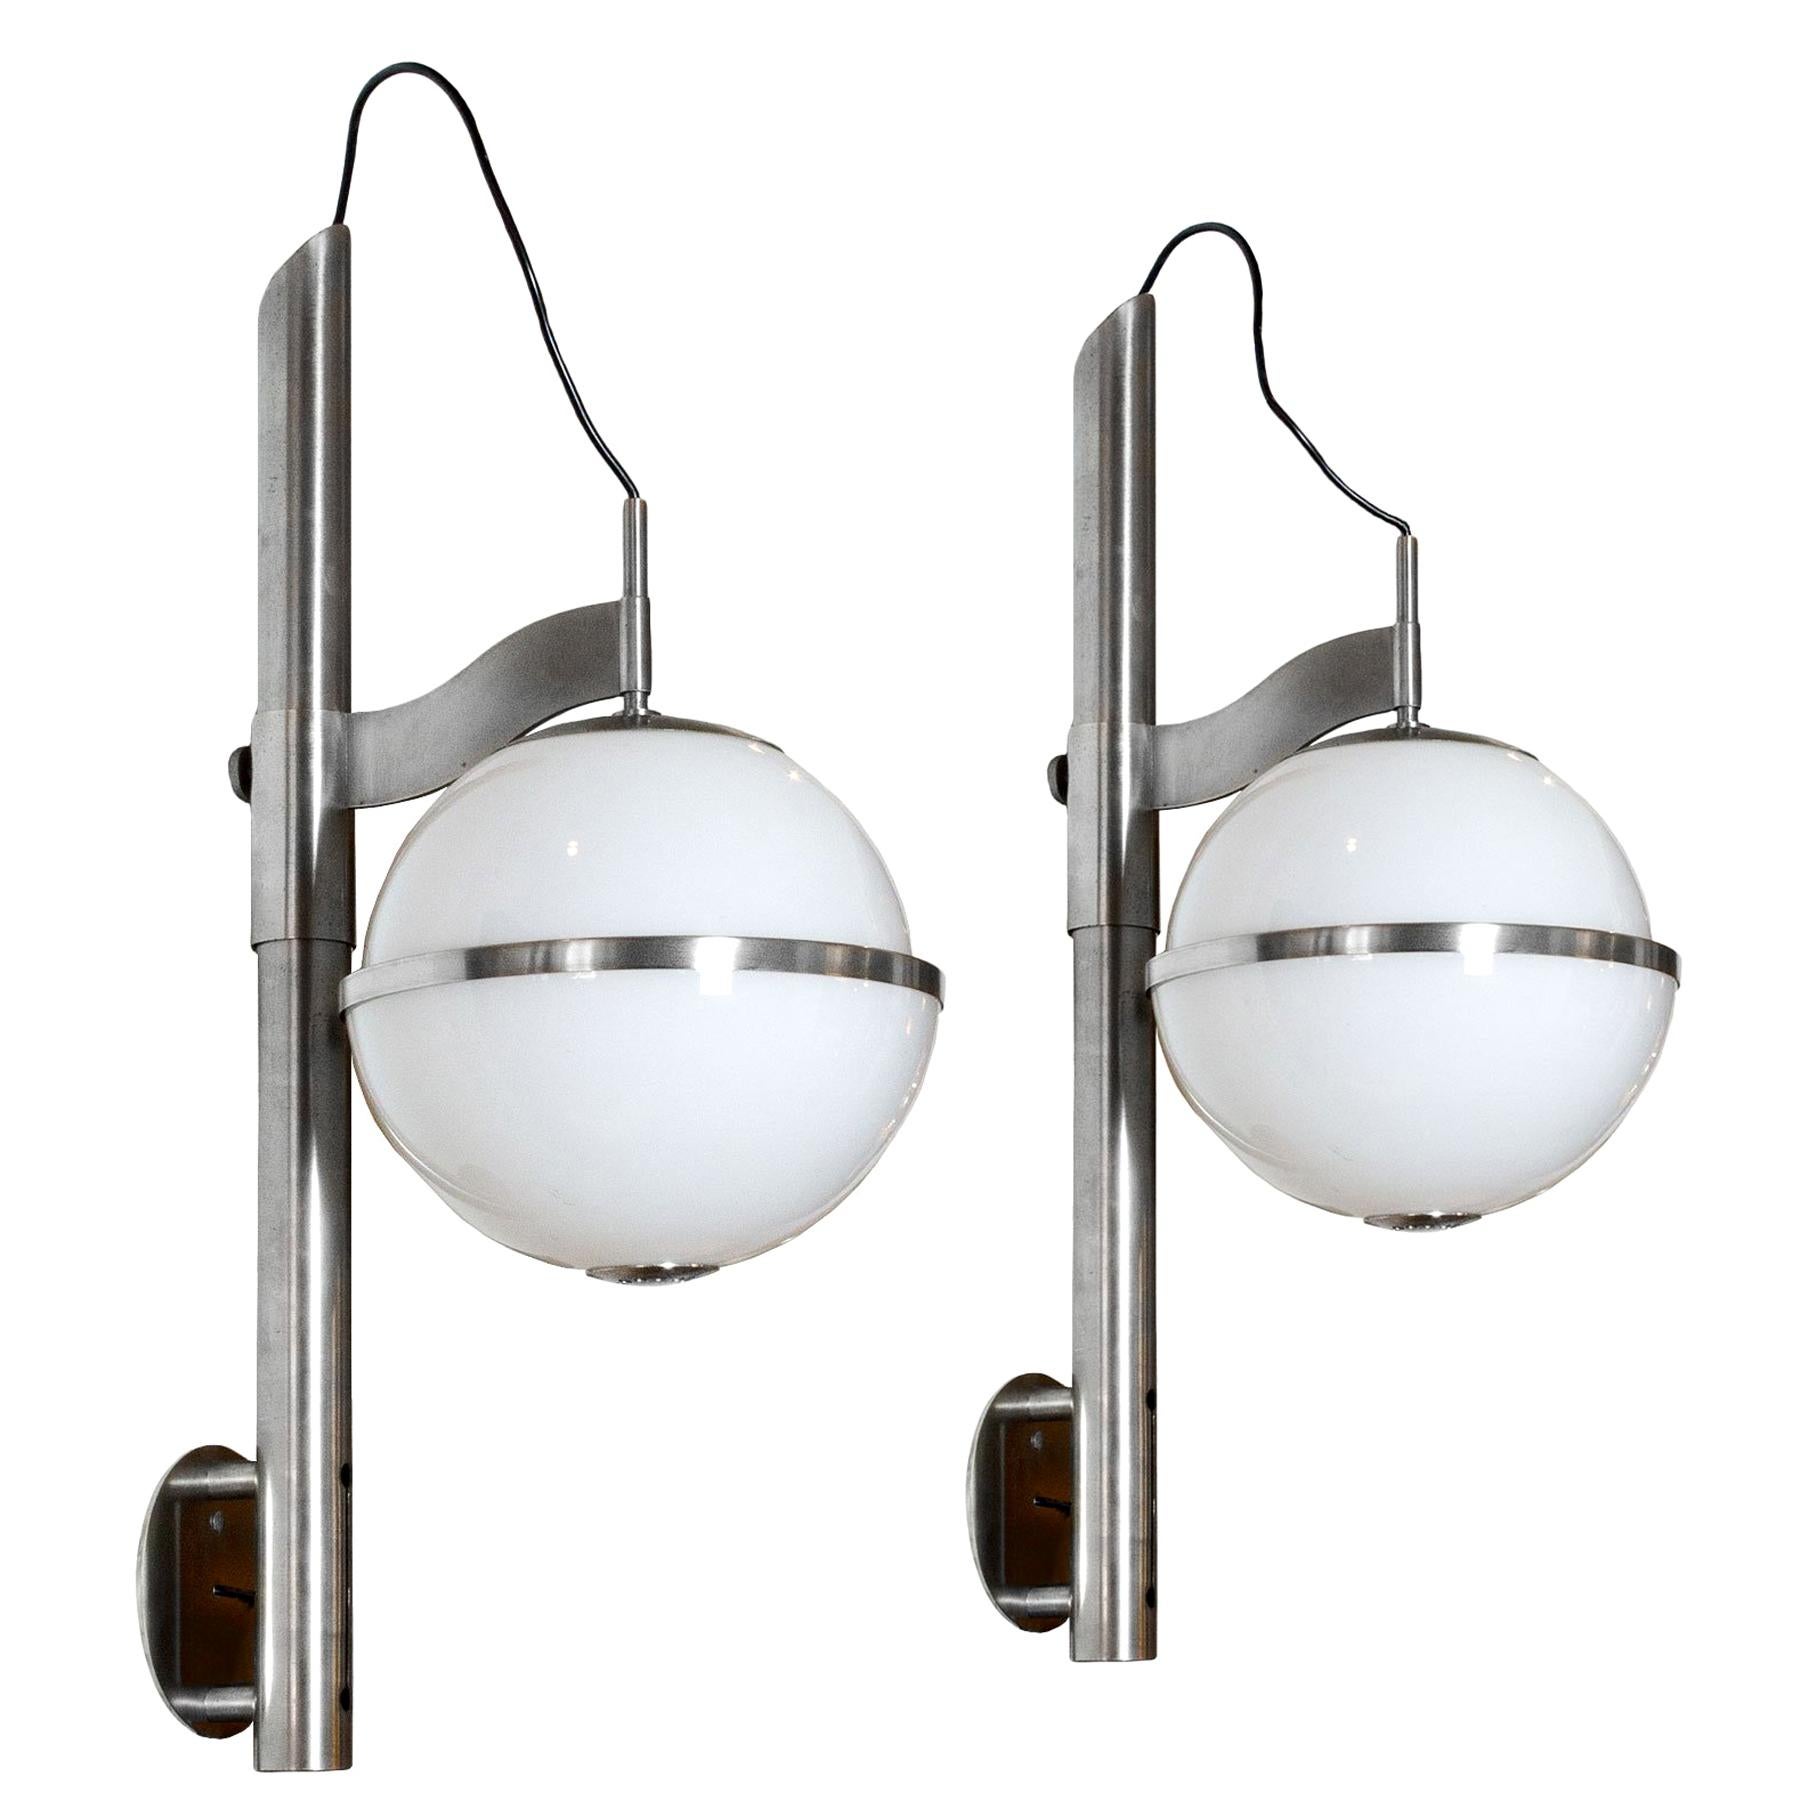 1970s Pair of Pusicona Large Wall Lights by Franco Micolitti, Artemide, Italy